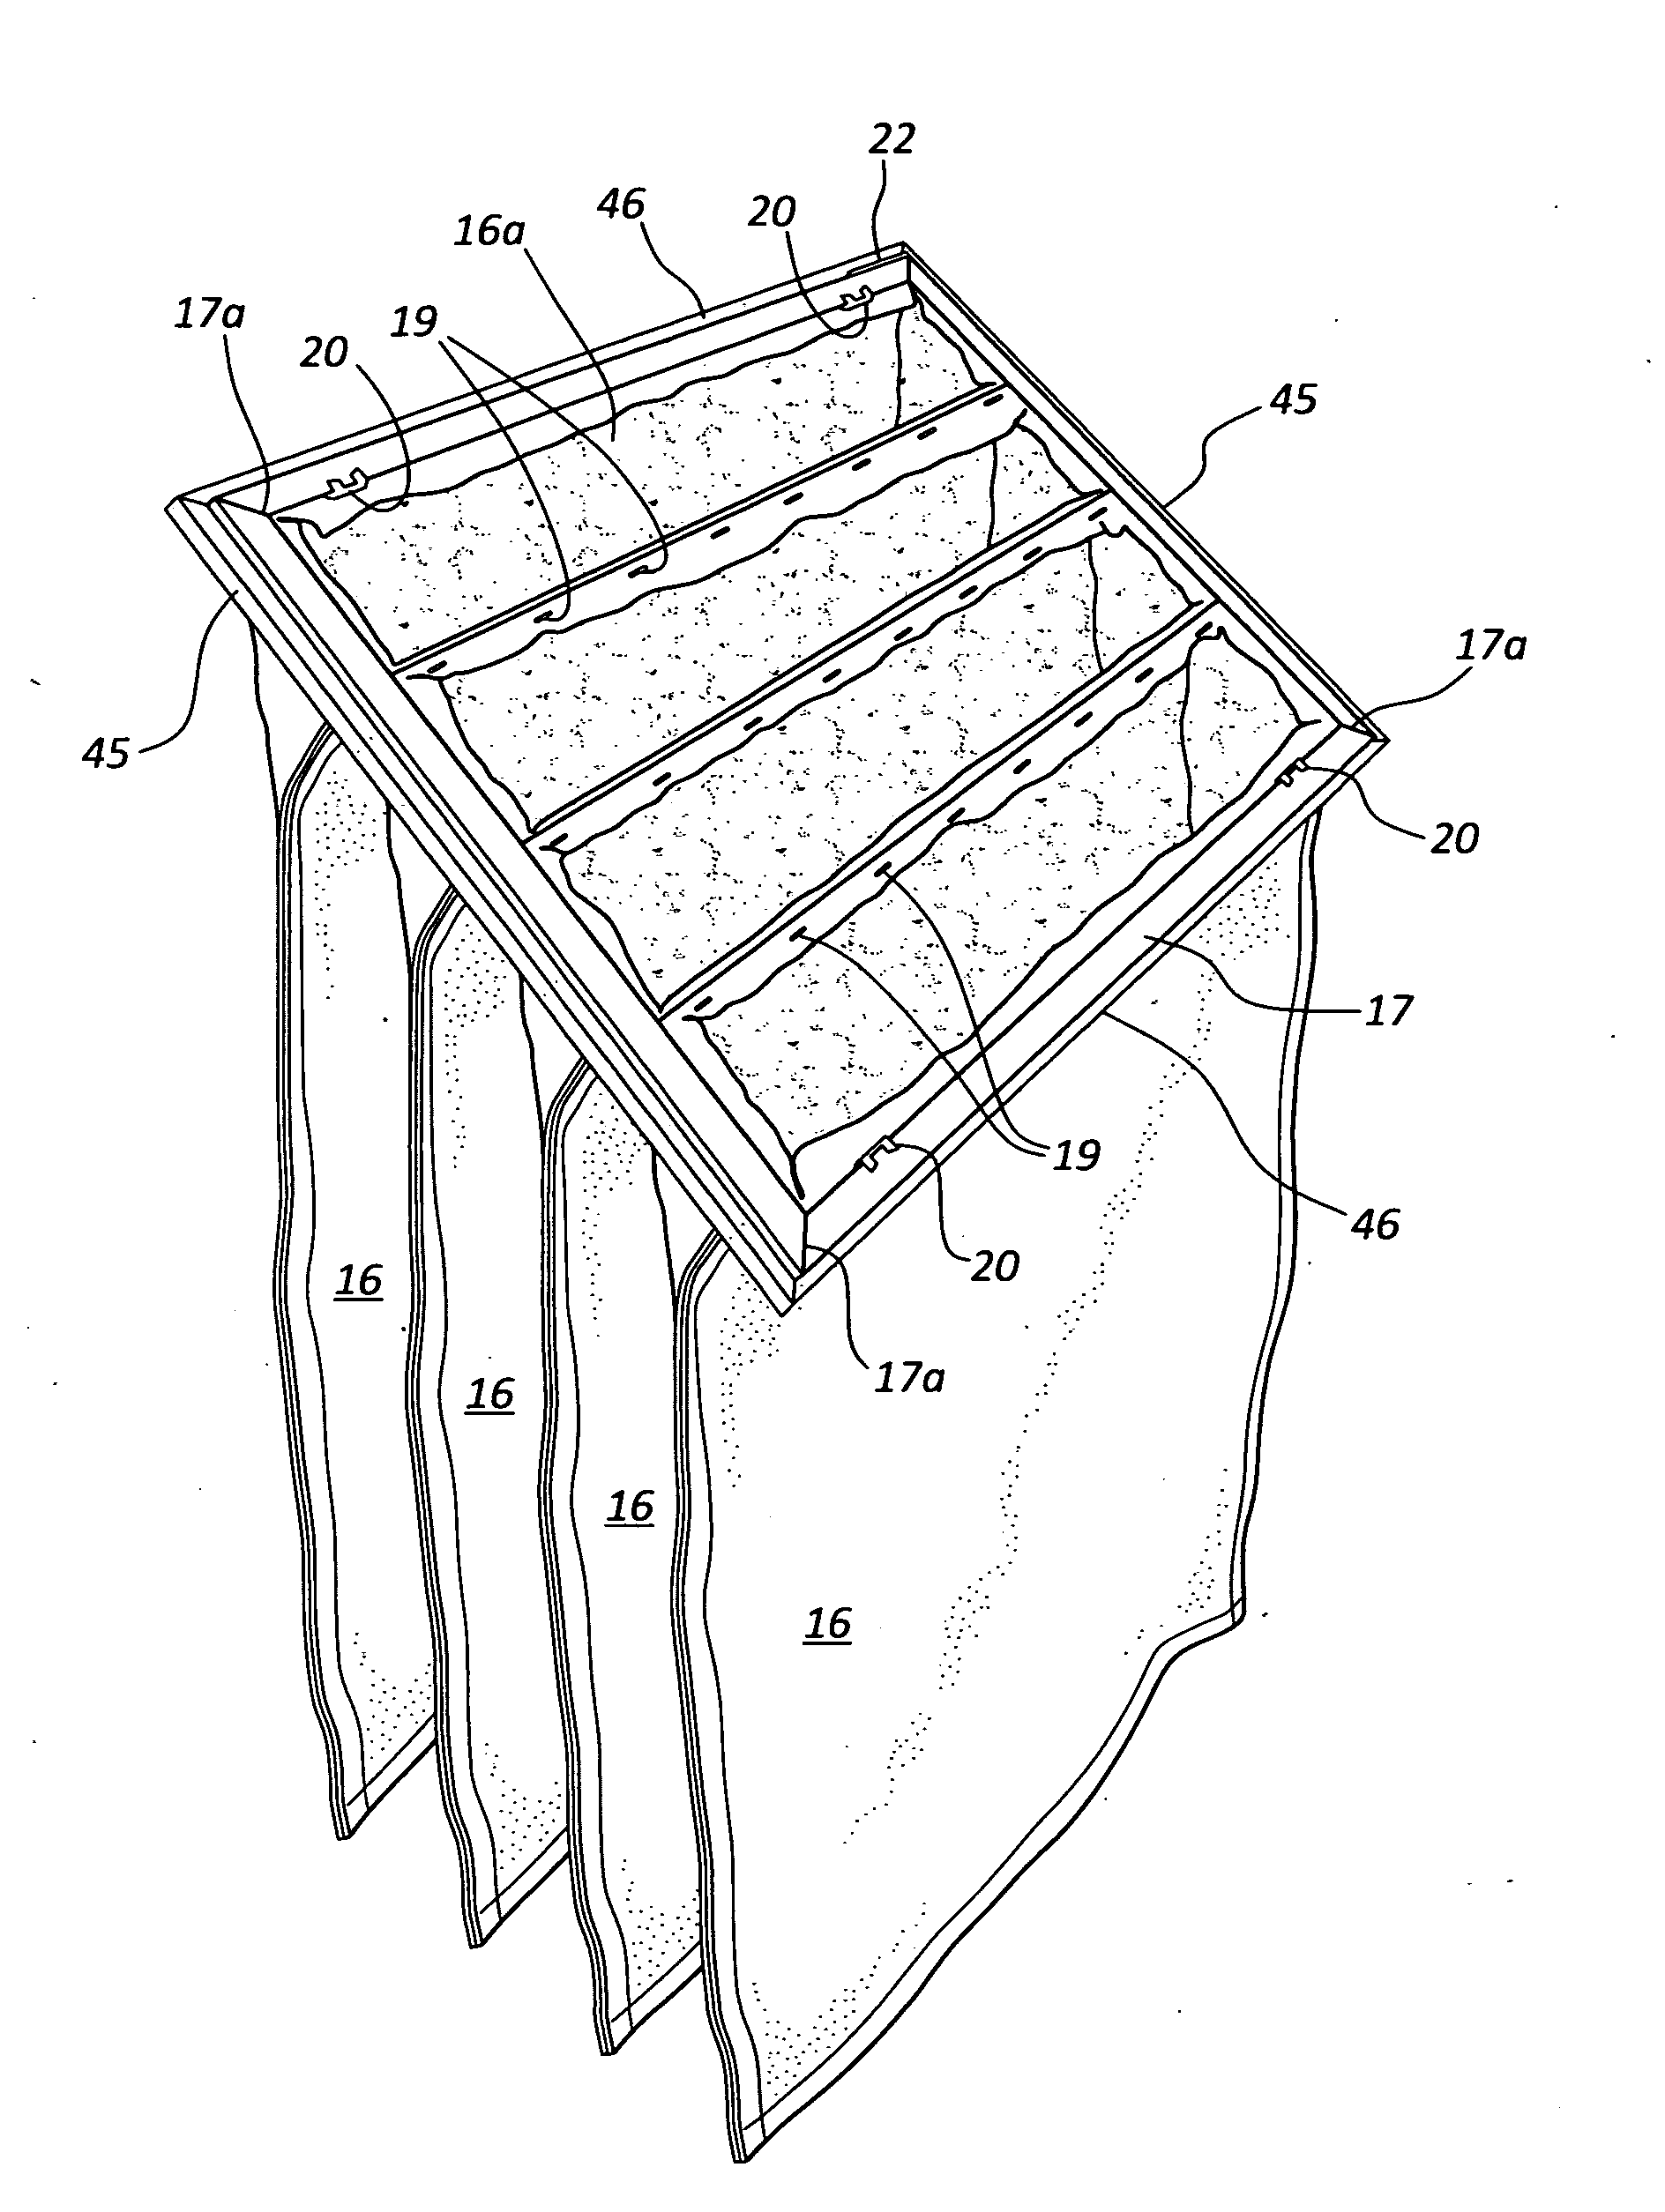 Bag filtration system for a forced air furnace